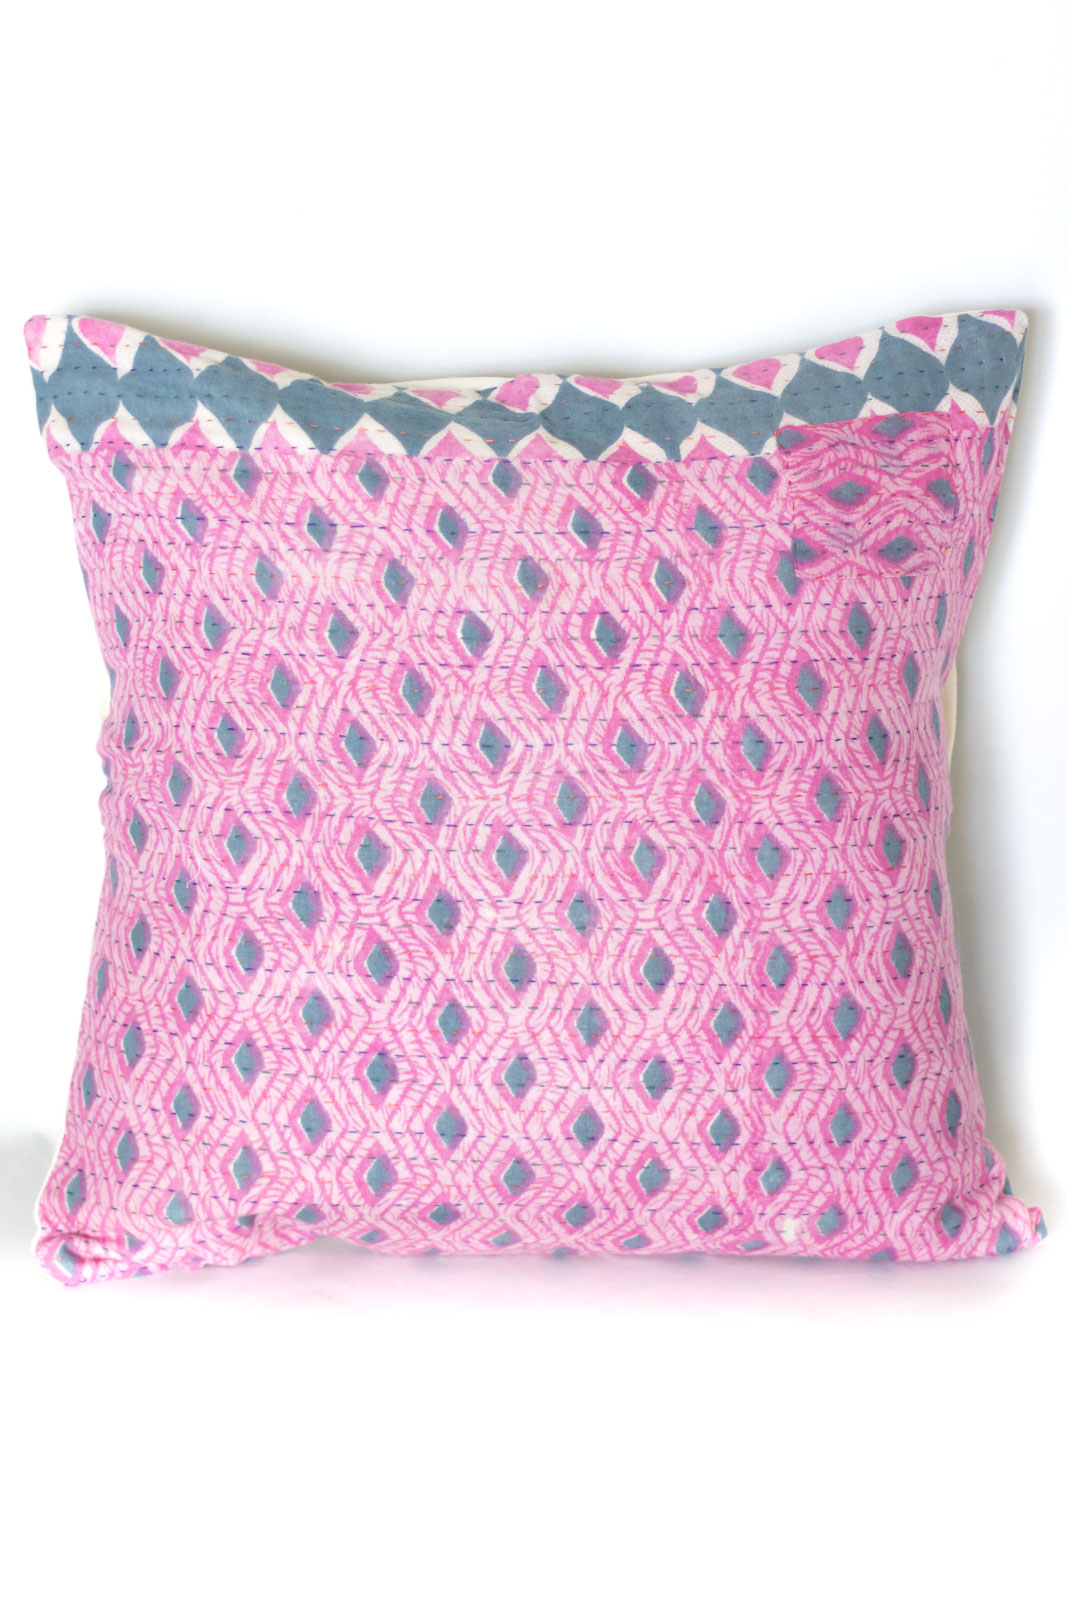 Majestic no. 7 Kantha Pillow Cover